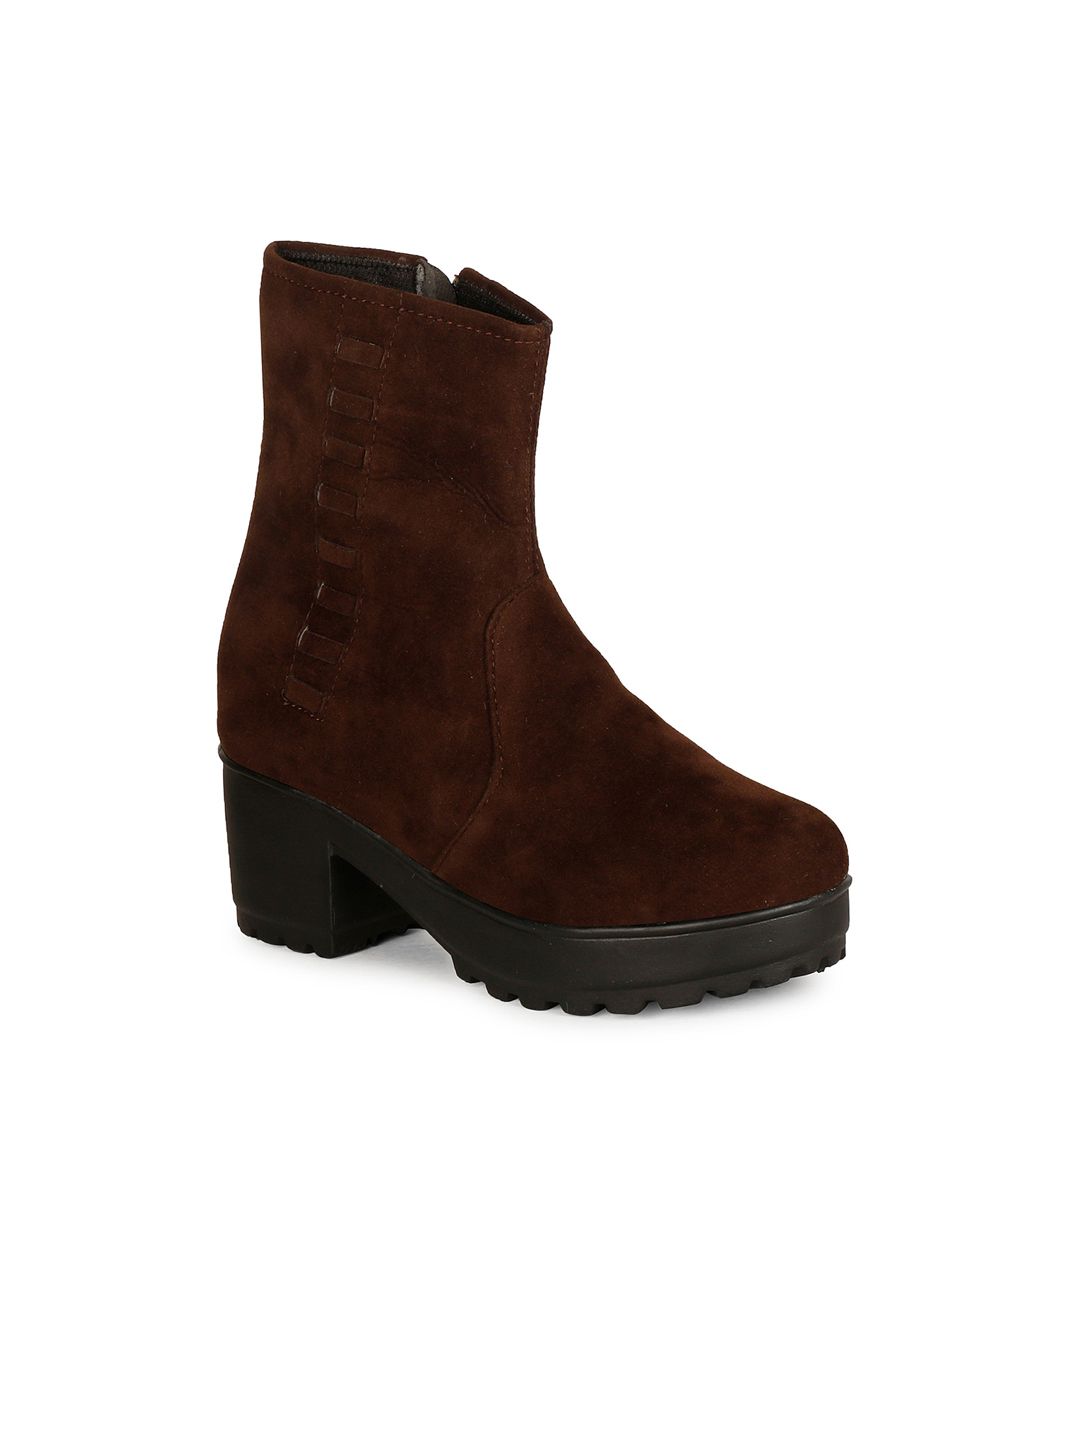 Denill Women Coffee Brown Suede Block Heeled Boots Price in India